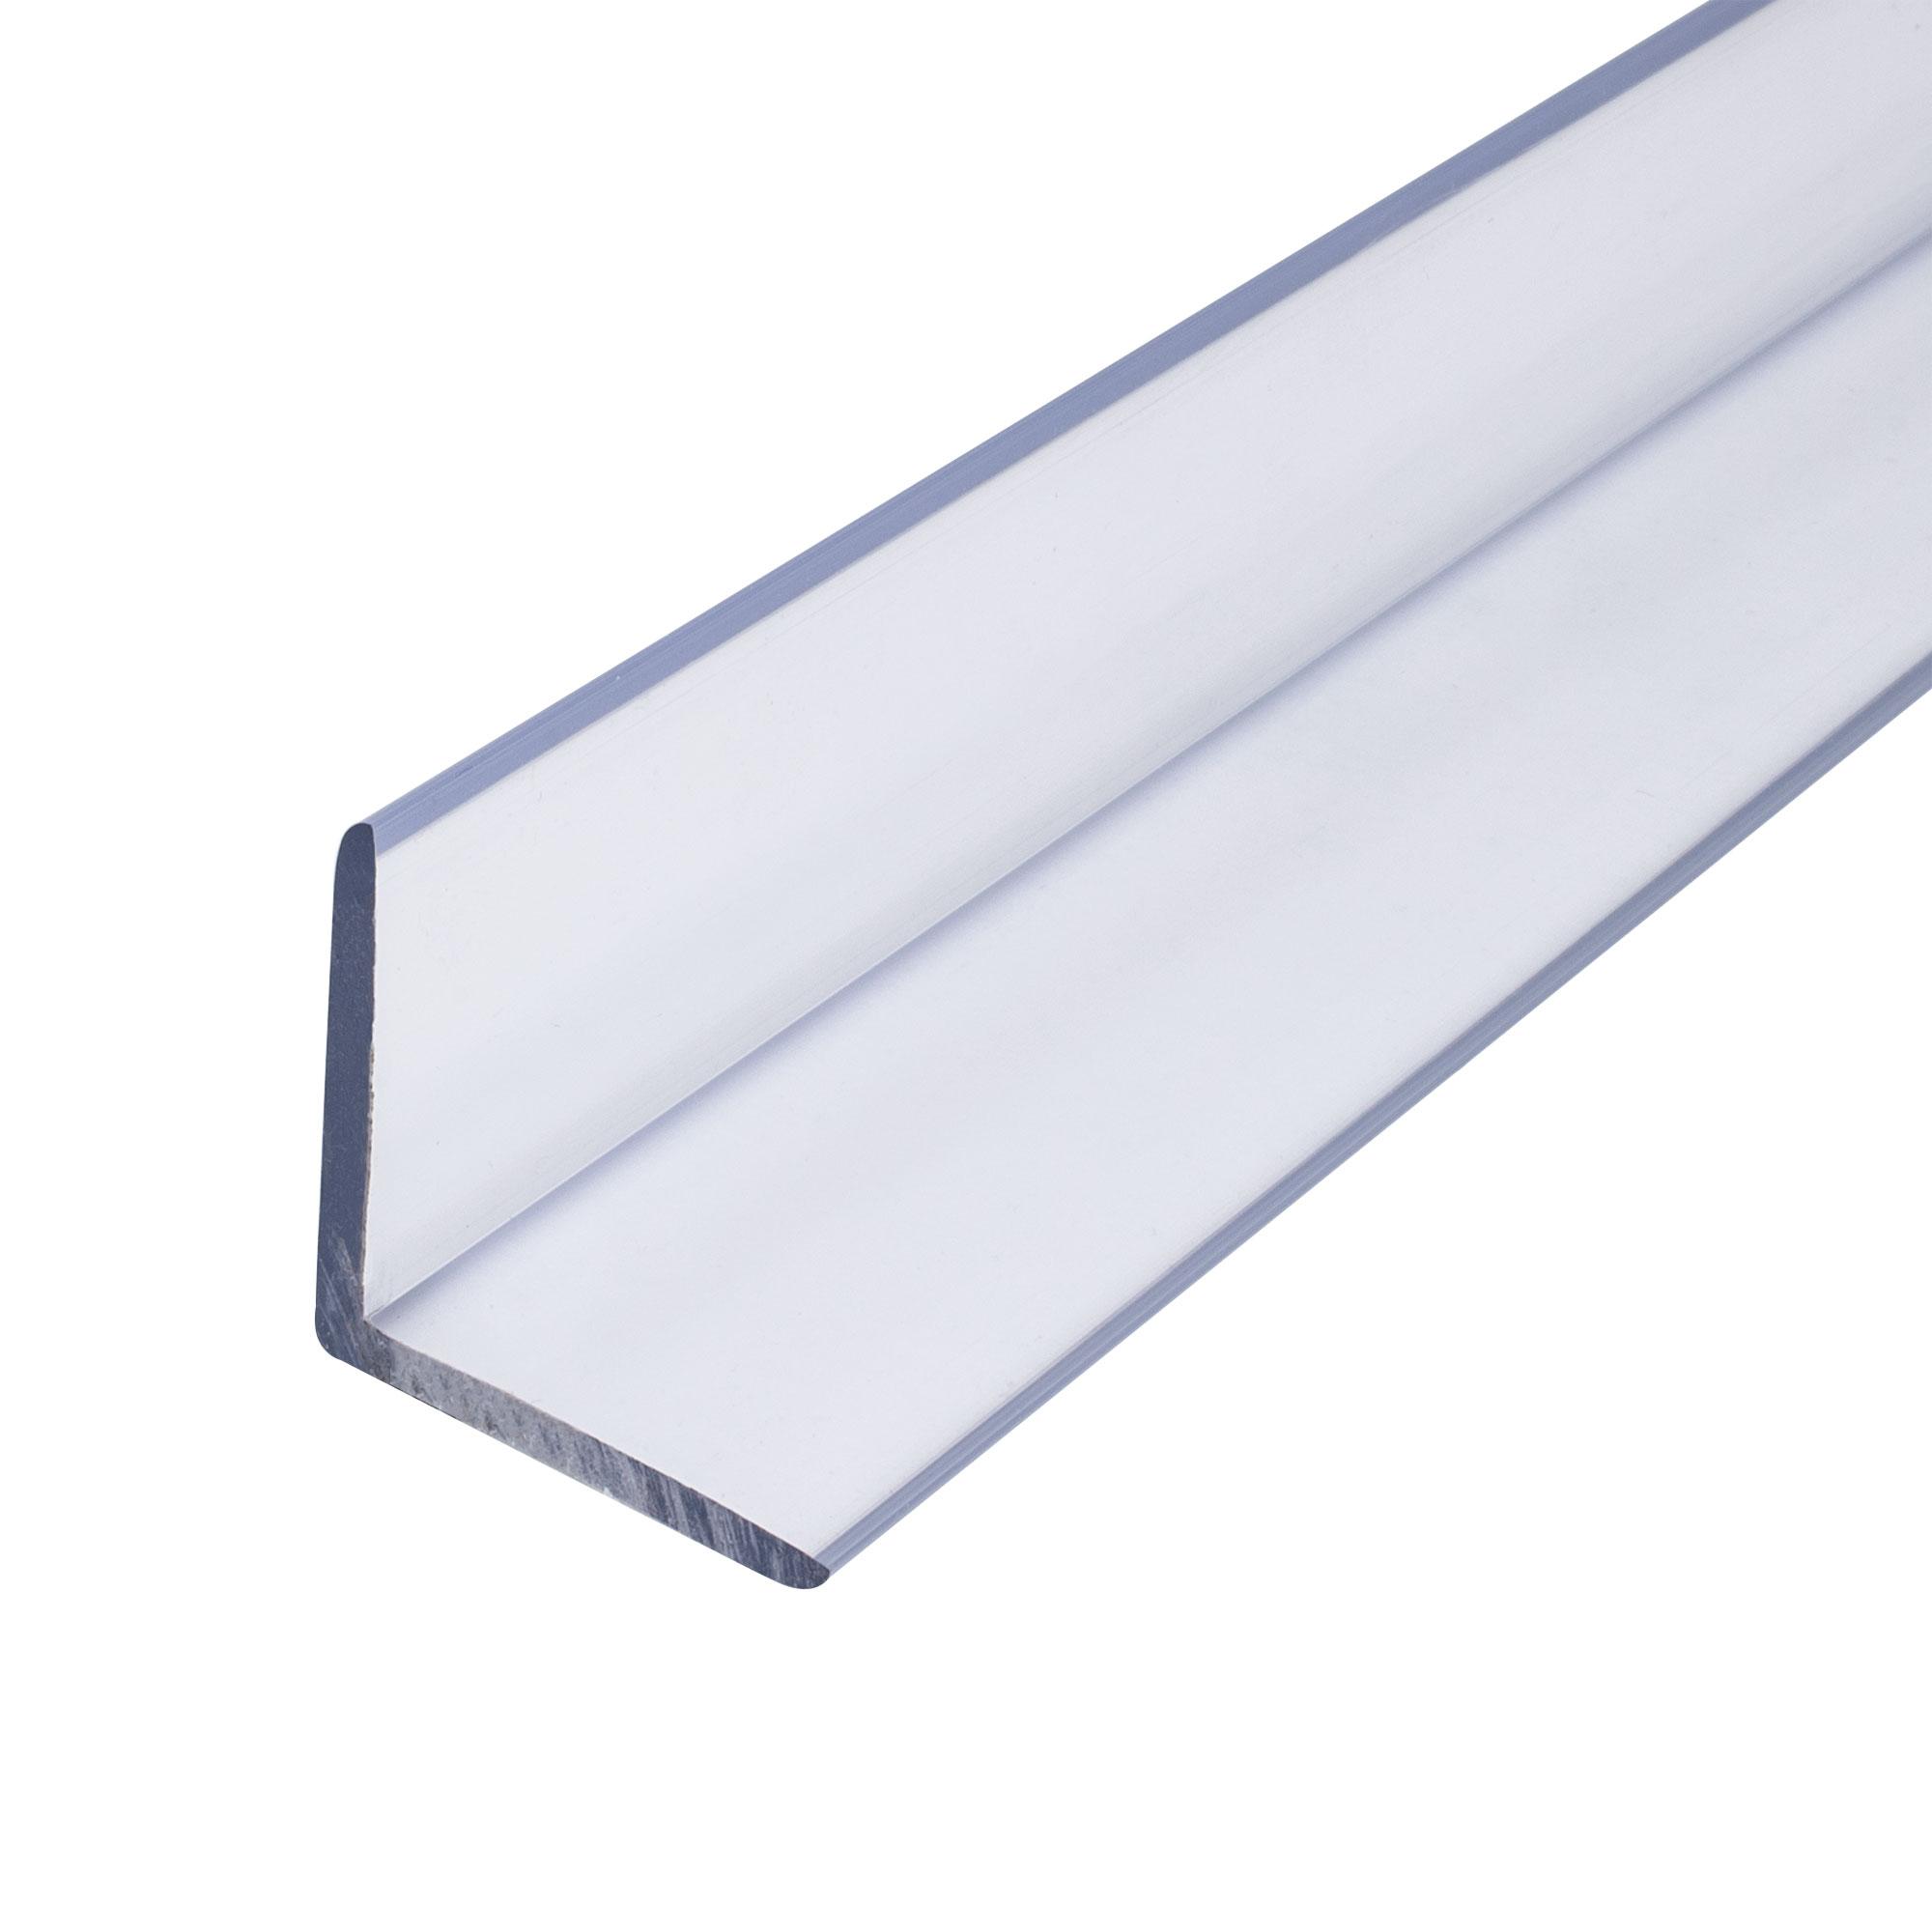 Outwater Plastics 1750-CL Butyrate 1-1/4 Inch X 1-1/4 Inch X 7/64 (.109) Inch Thick Clear Plastic Even Leg Angle Moulding 36 Inch Lengths (Pack of 4) - image 1 of 5